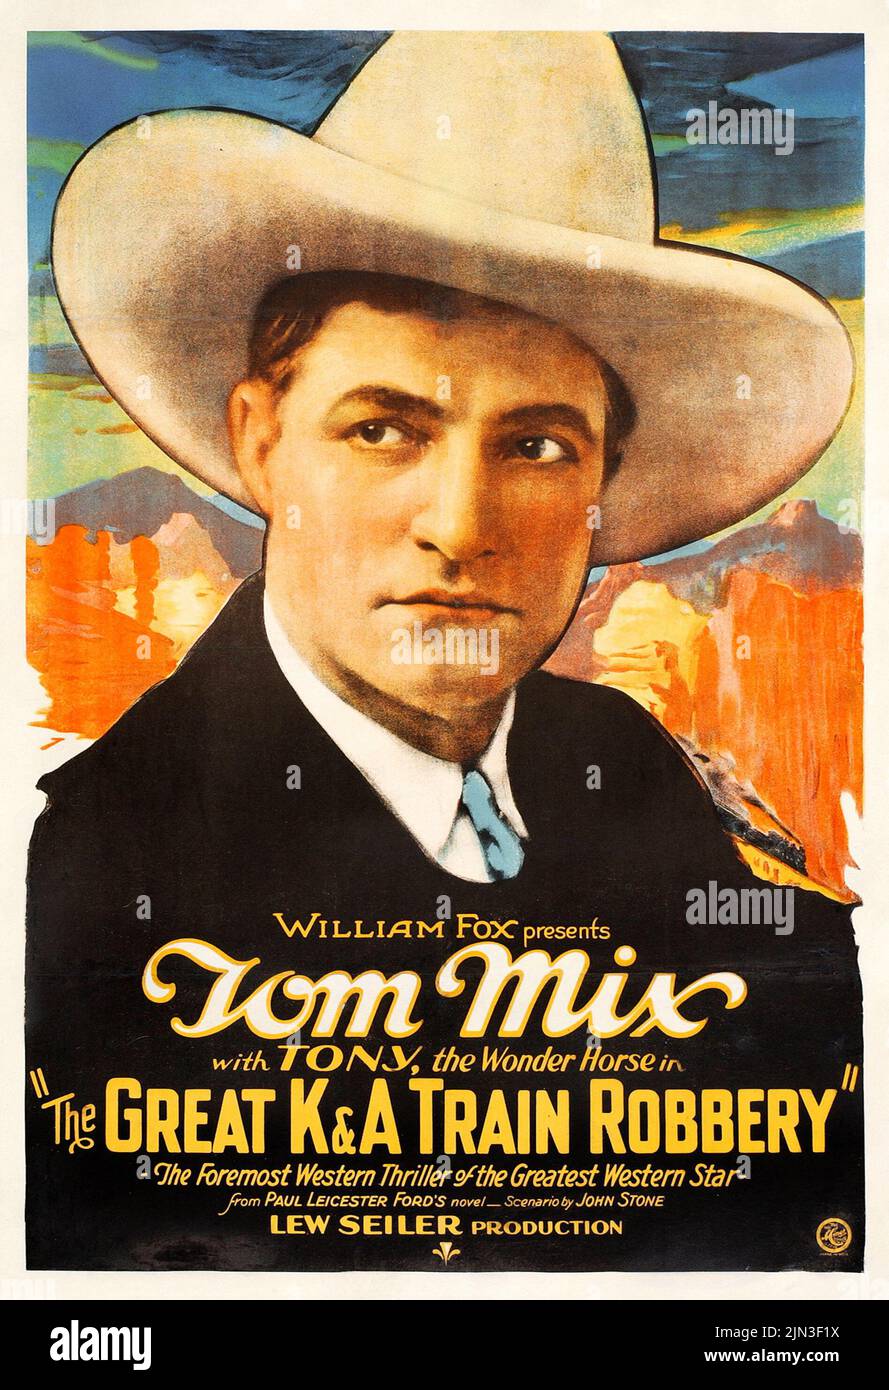 Tom Mix - The Great K & A Train Robbery (Fox, 1926) vintage movie poster. Stock Photo